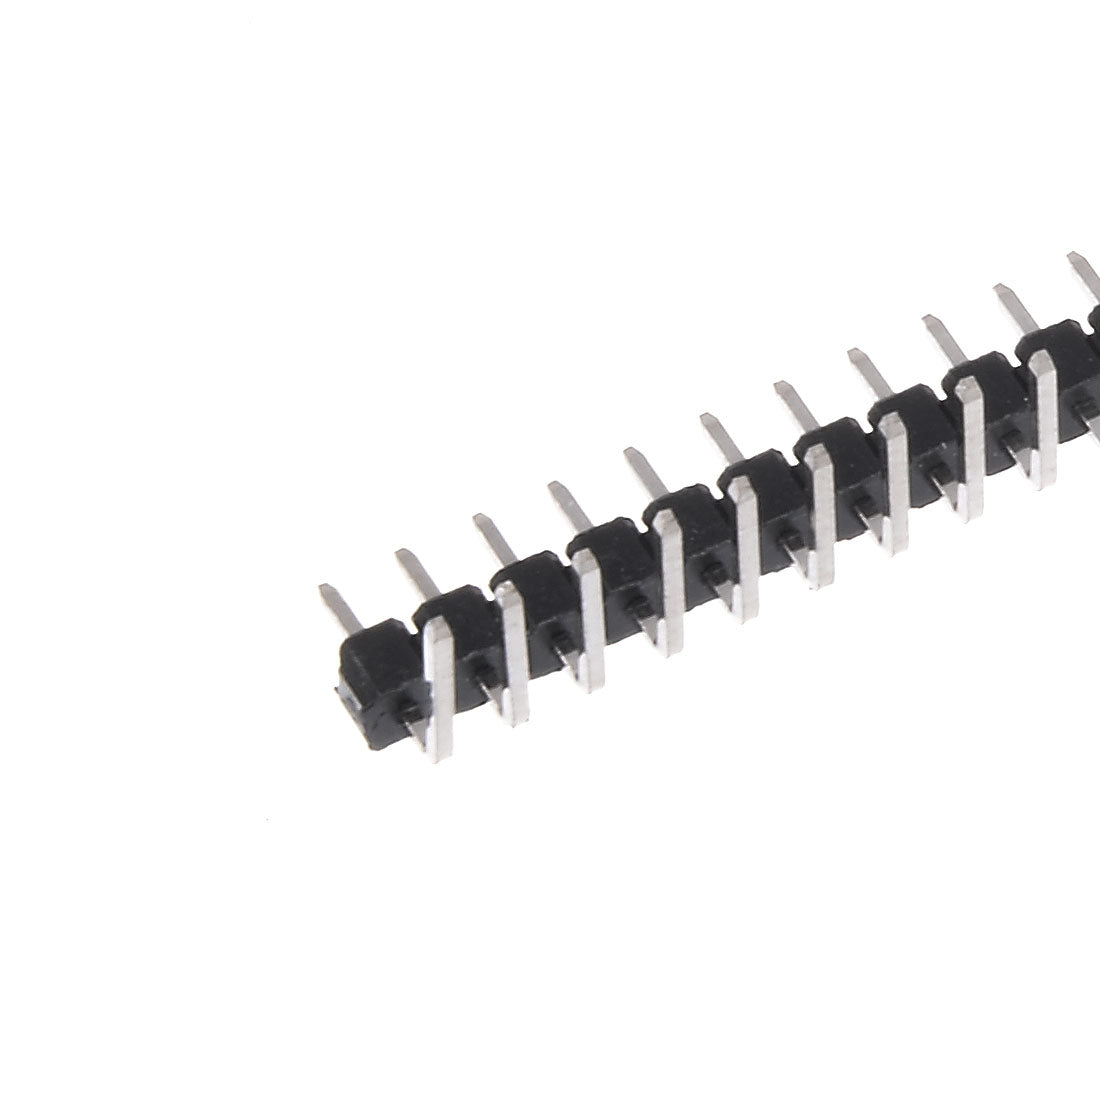 uxcell Uxcell 20Pcs 2.54mm Pitch 40P Single Row Curved Connector Pin Header Strip for Arduino Prototype Shield